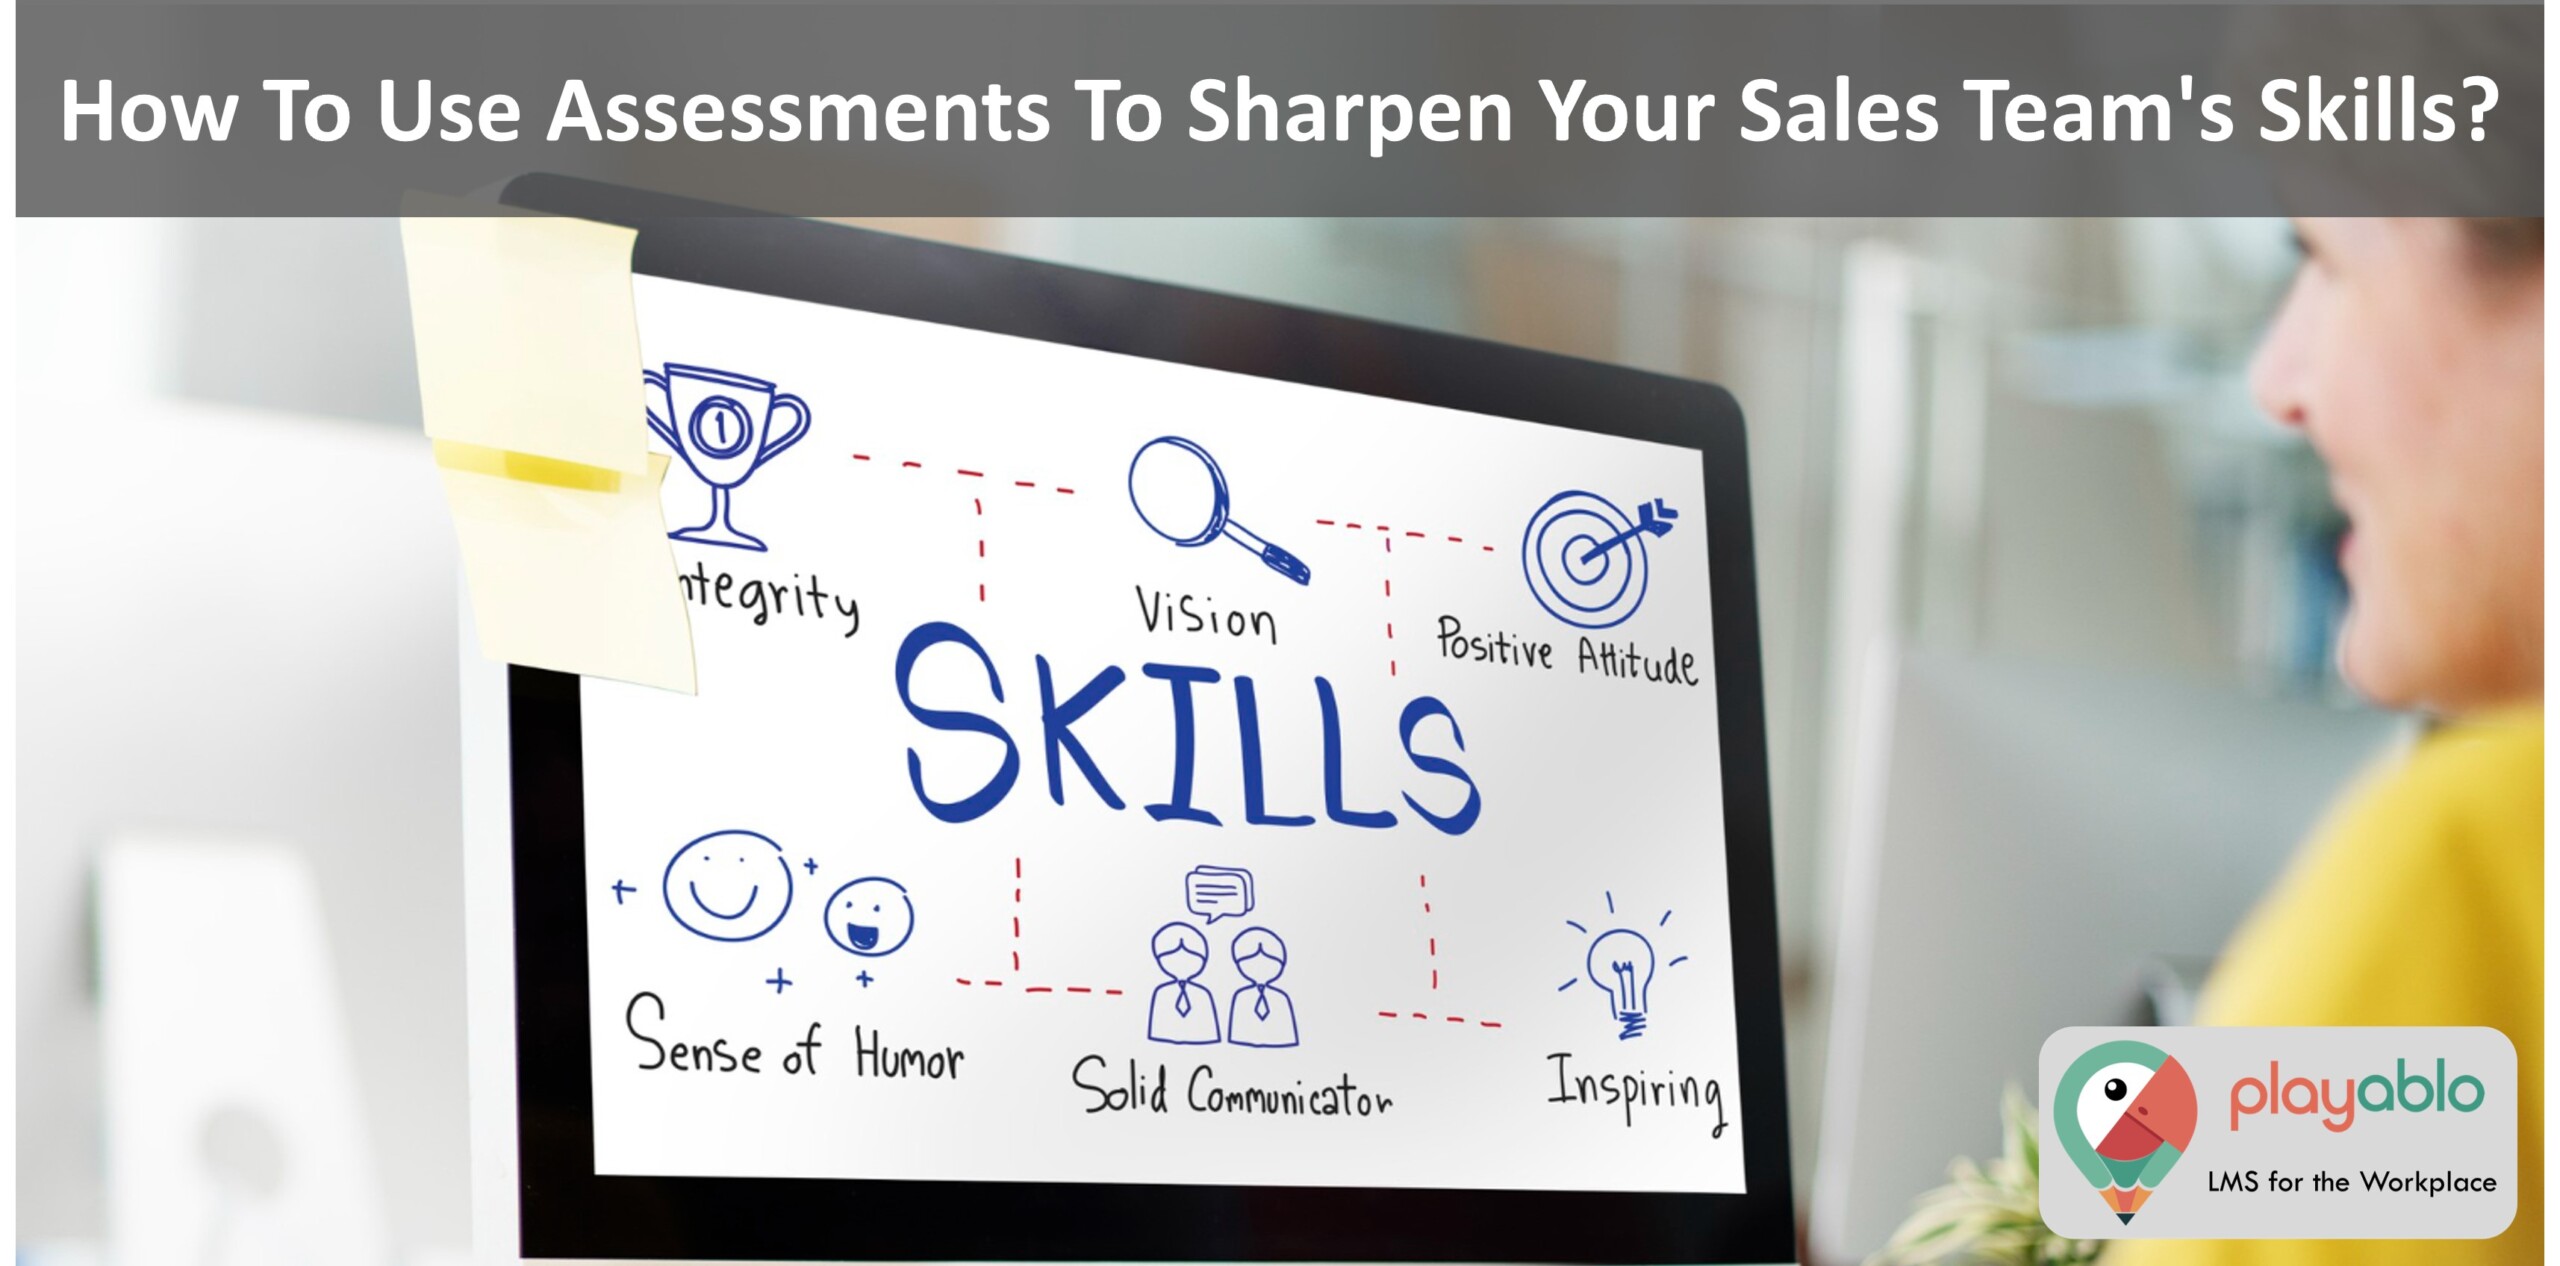 How to Improve Sales Skills: 5 Powerful Assessment Steps